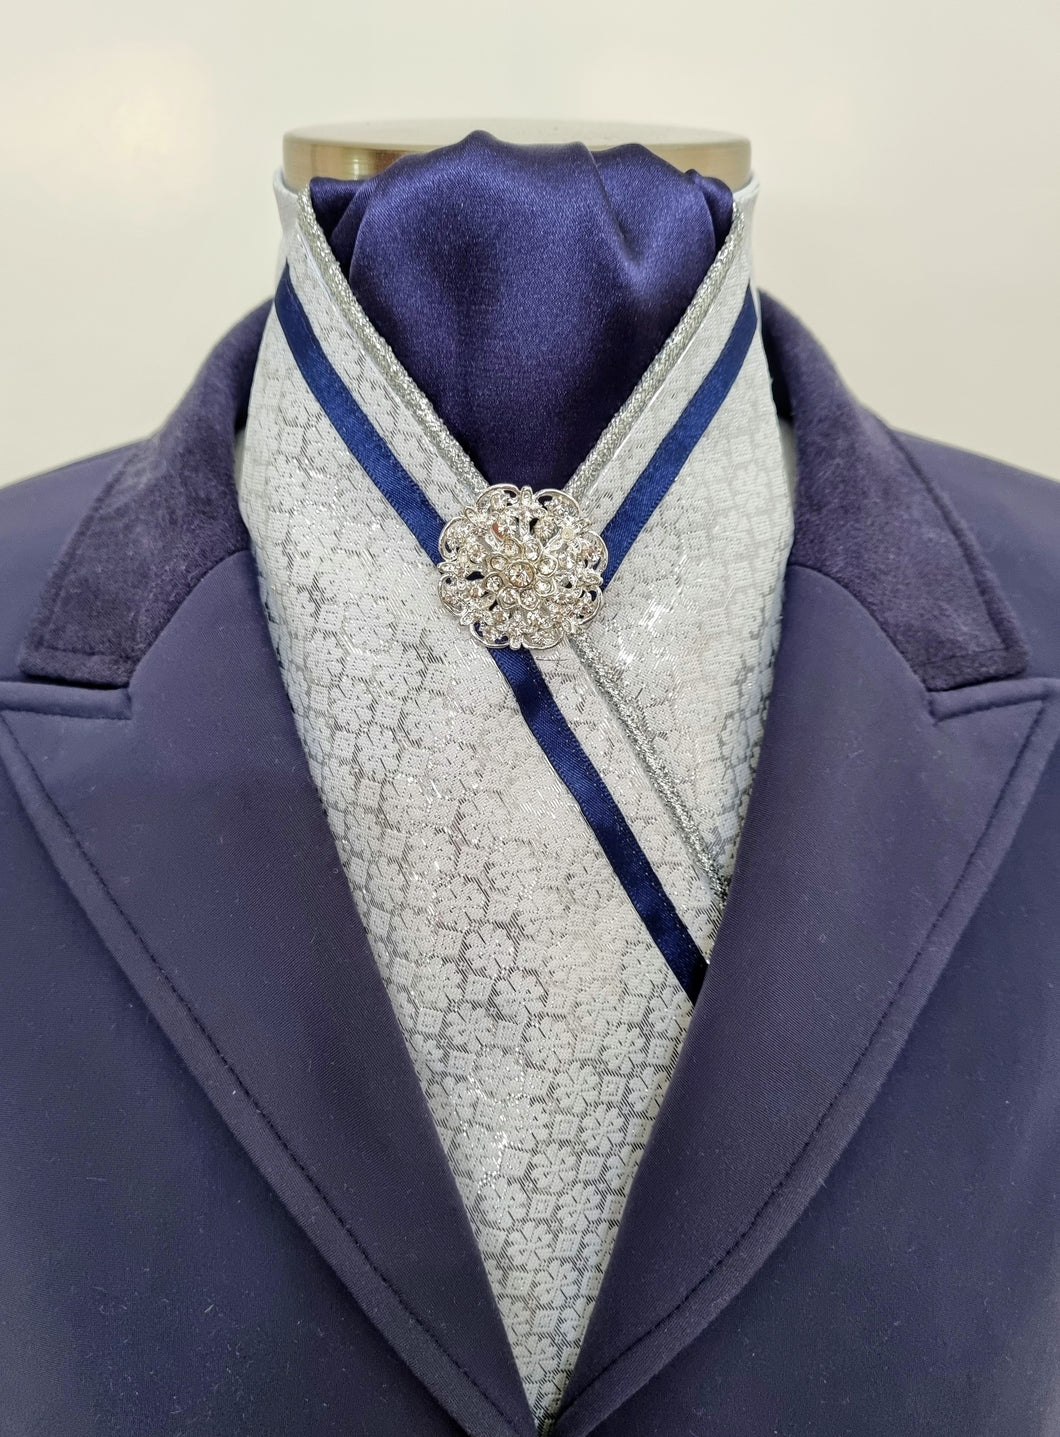 ERA FIONA STOCK TIE - Silver brocade with navy, metallic silver piping, navy trim and brooch